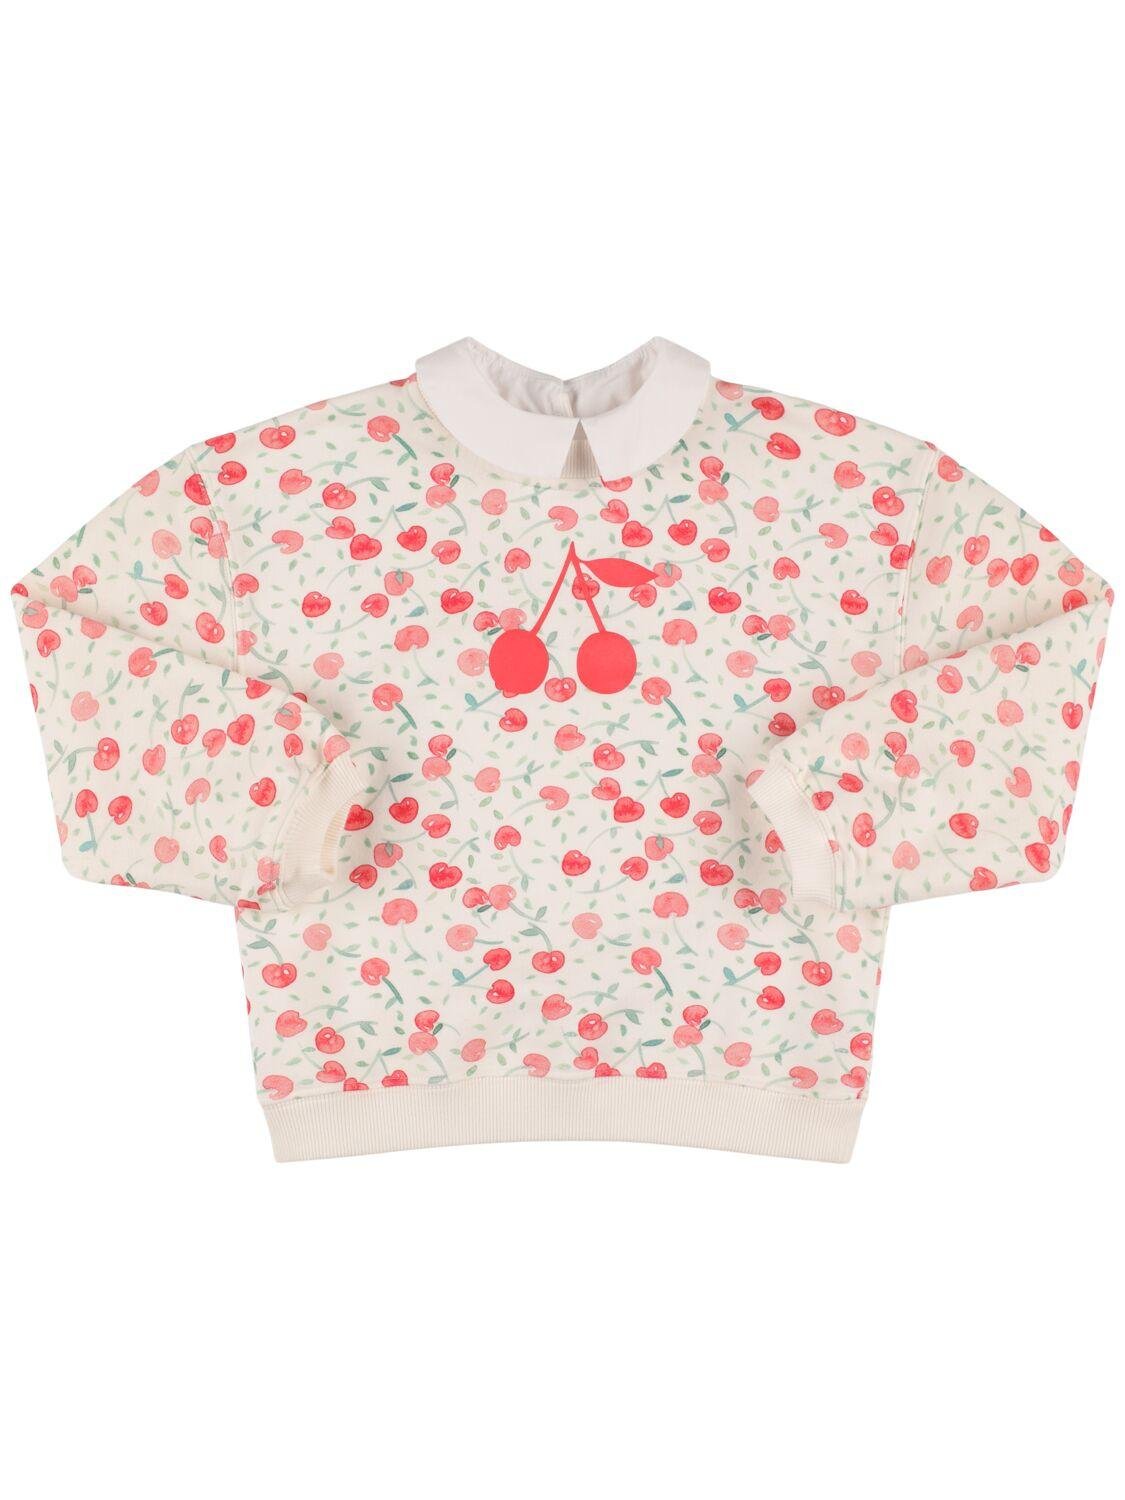 All Over Print Cotton Sweatshirt by BONPOINT